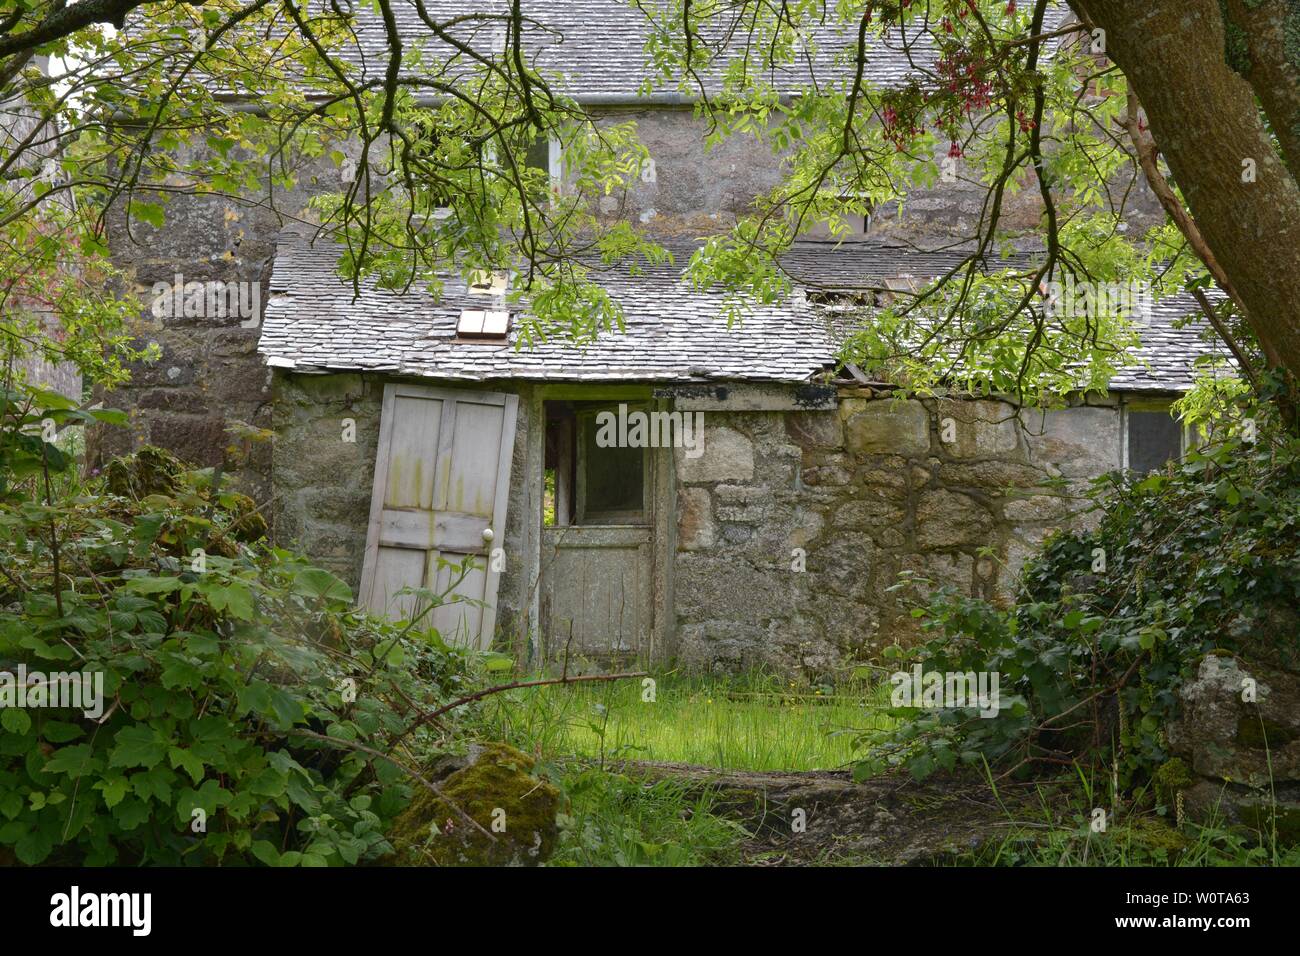 View of a derelict farm building in Cornwall (UK) surrounded by lush tree foliage. Stock Photo